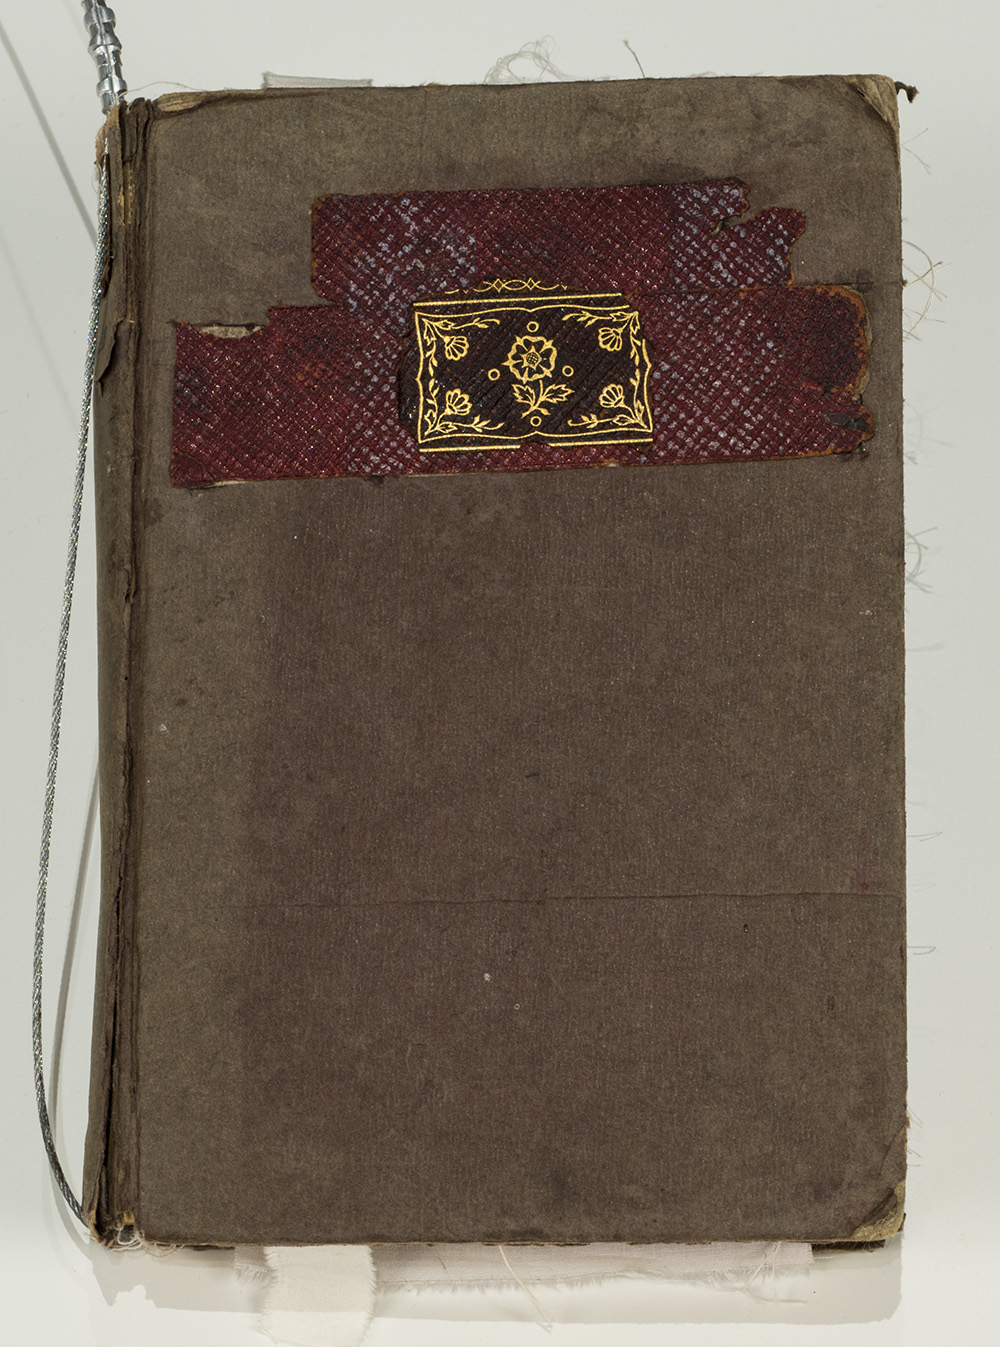 A worn book bound in brown paper with a gold inlay.